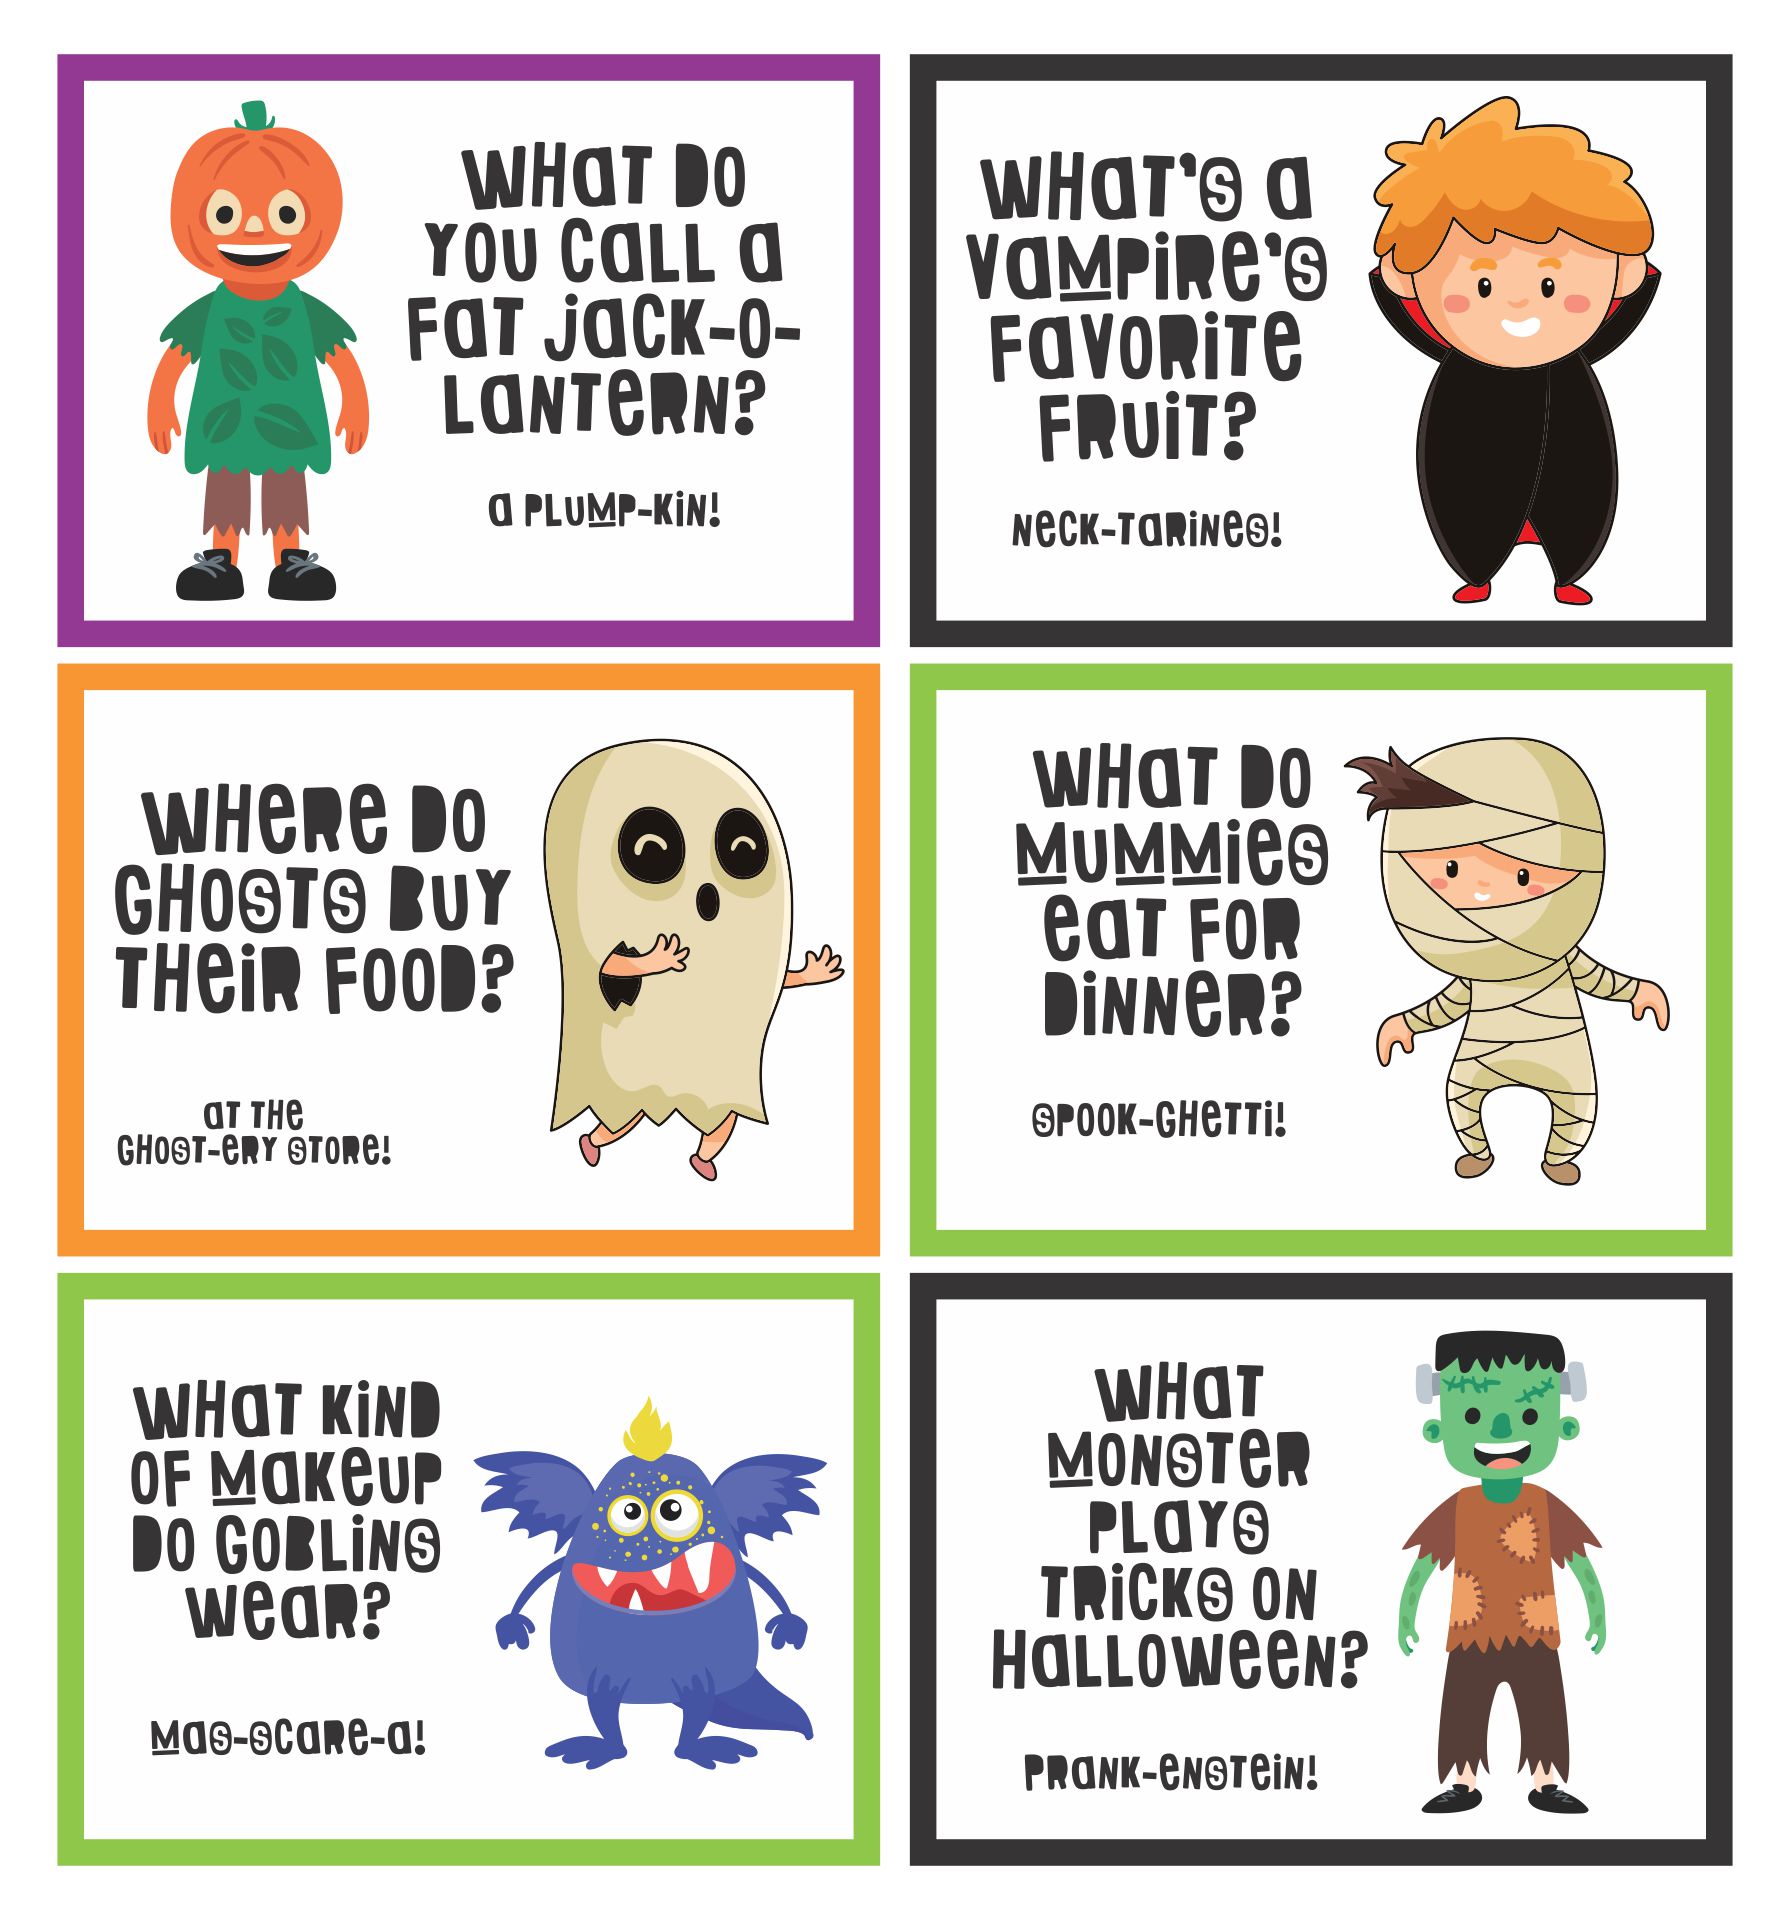 Halloween Fun Facts Lunchbox Printables